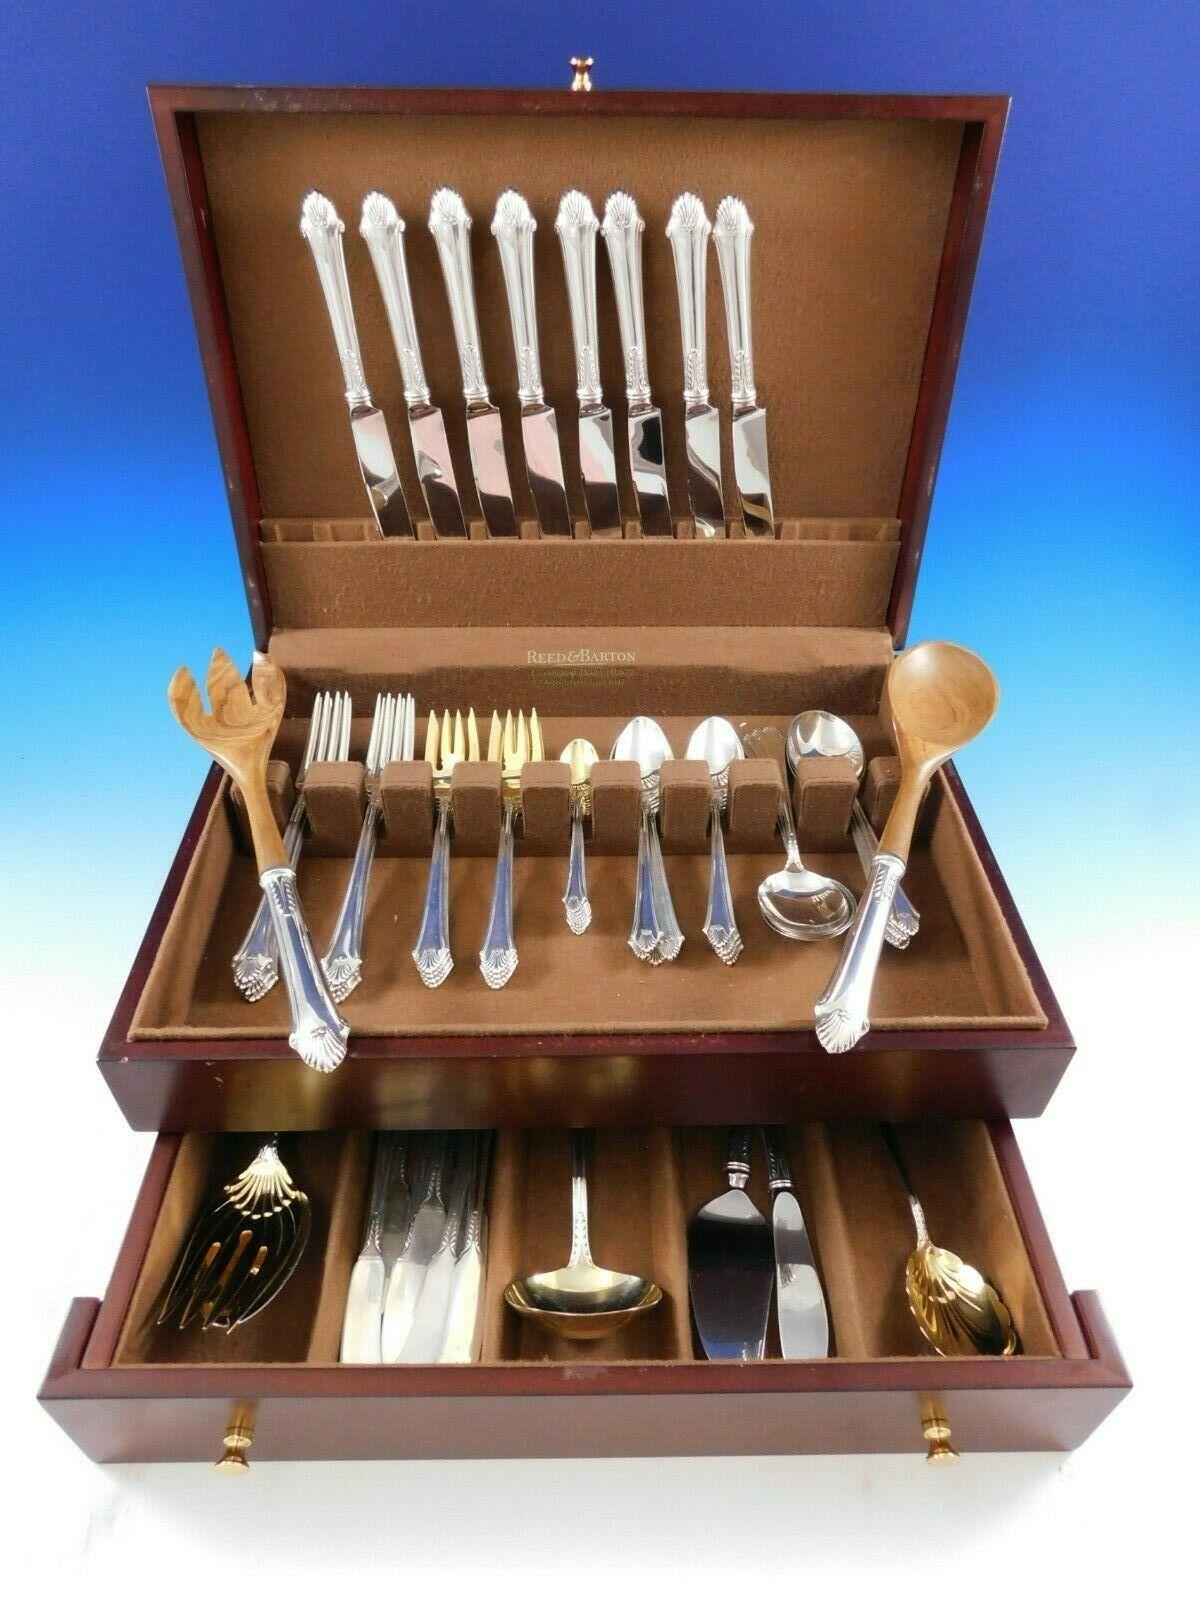 Issued in 1987, Edgemont by Gorham has symmetrical flutes that adorn the end of the flatware, flaring in an unmistakable pattern.

Edgemont by Gorham sterling silver Flatware set, 60 pieces. This set includes:

8 Regular Knives w/French stainless